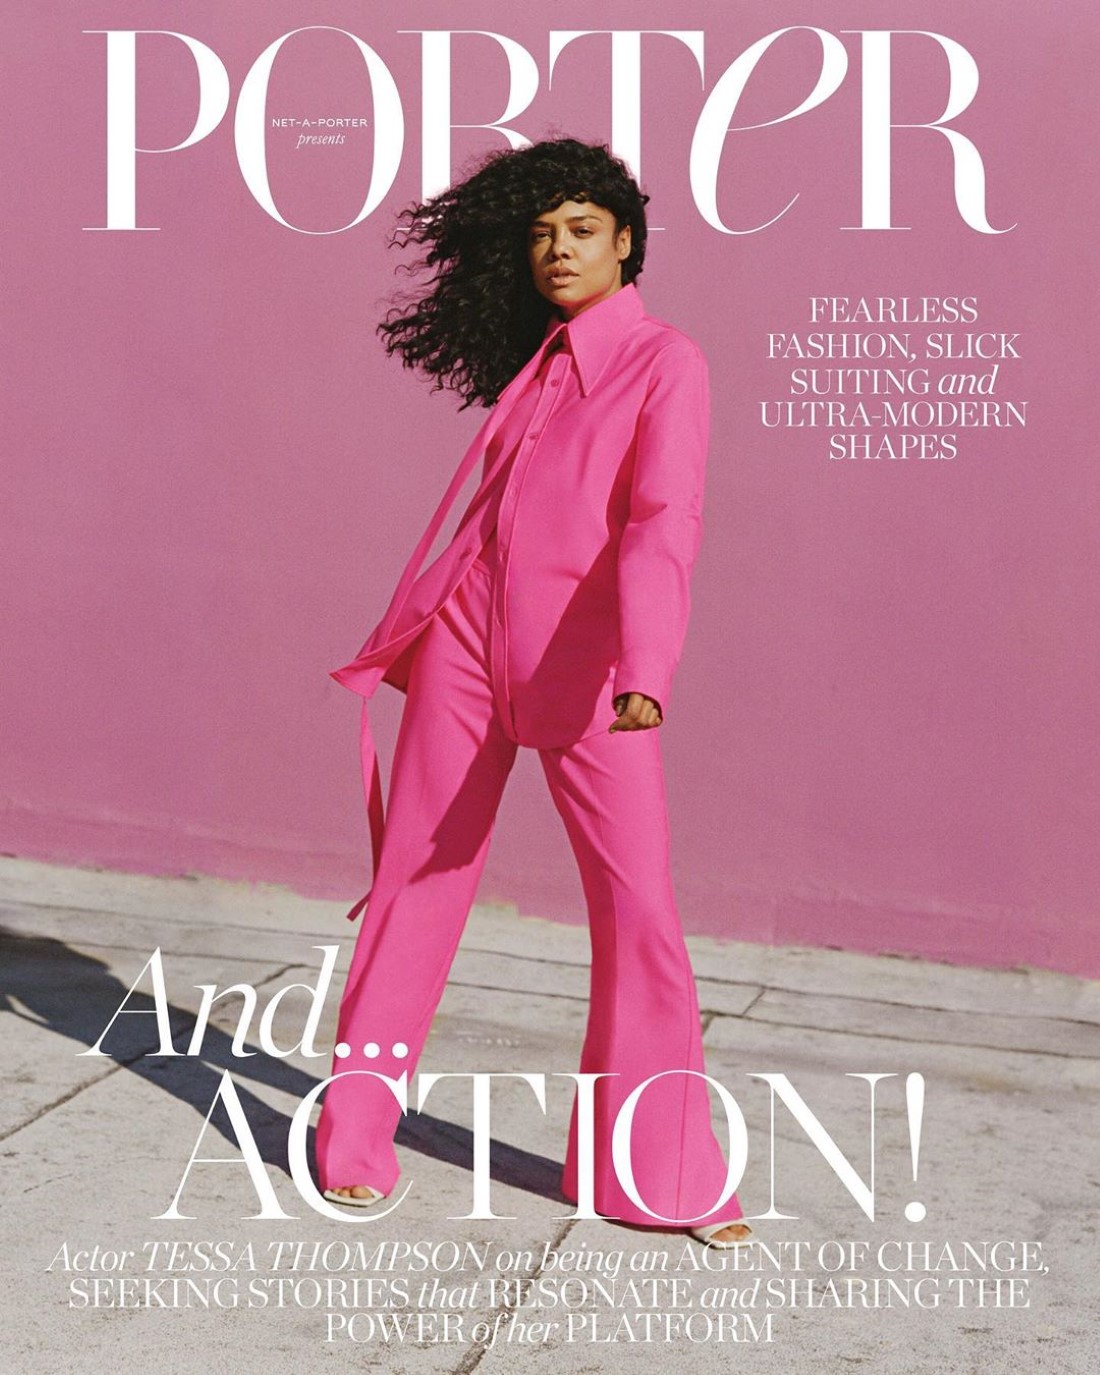 Tessa Thompson covers Porter Magazine August 10th, 2020 by Shaniqwa Jarvis